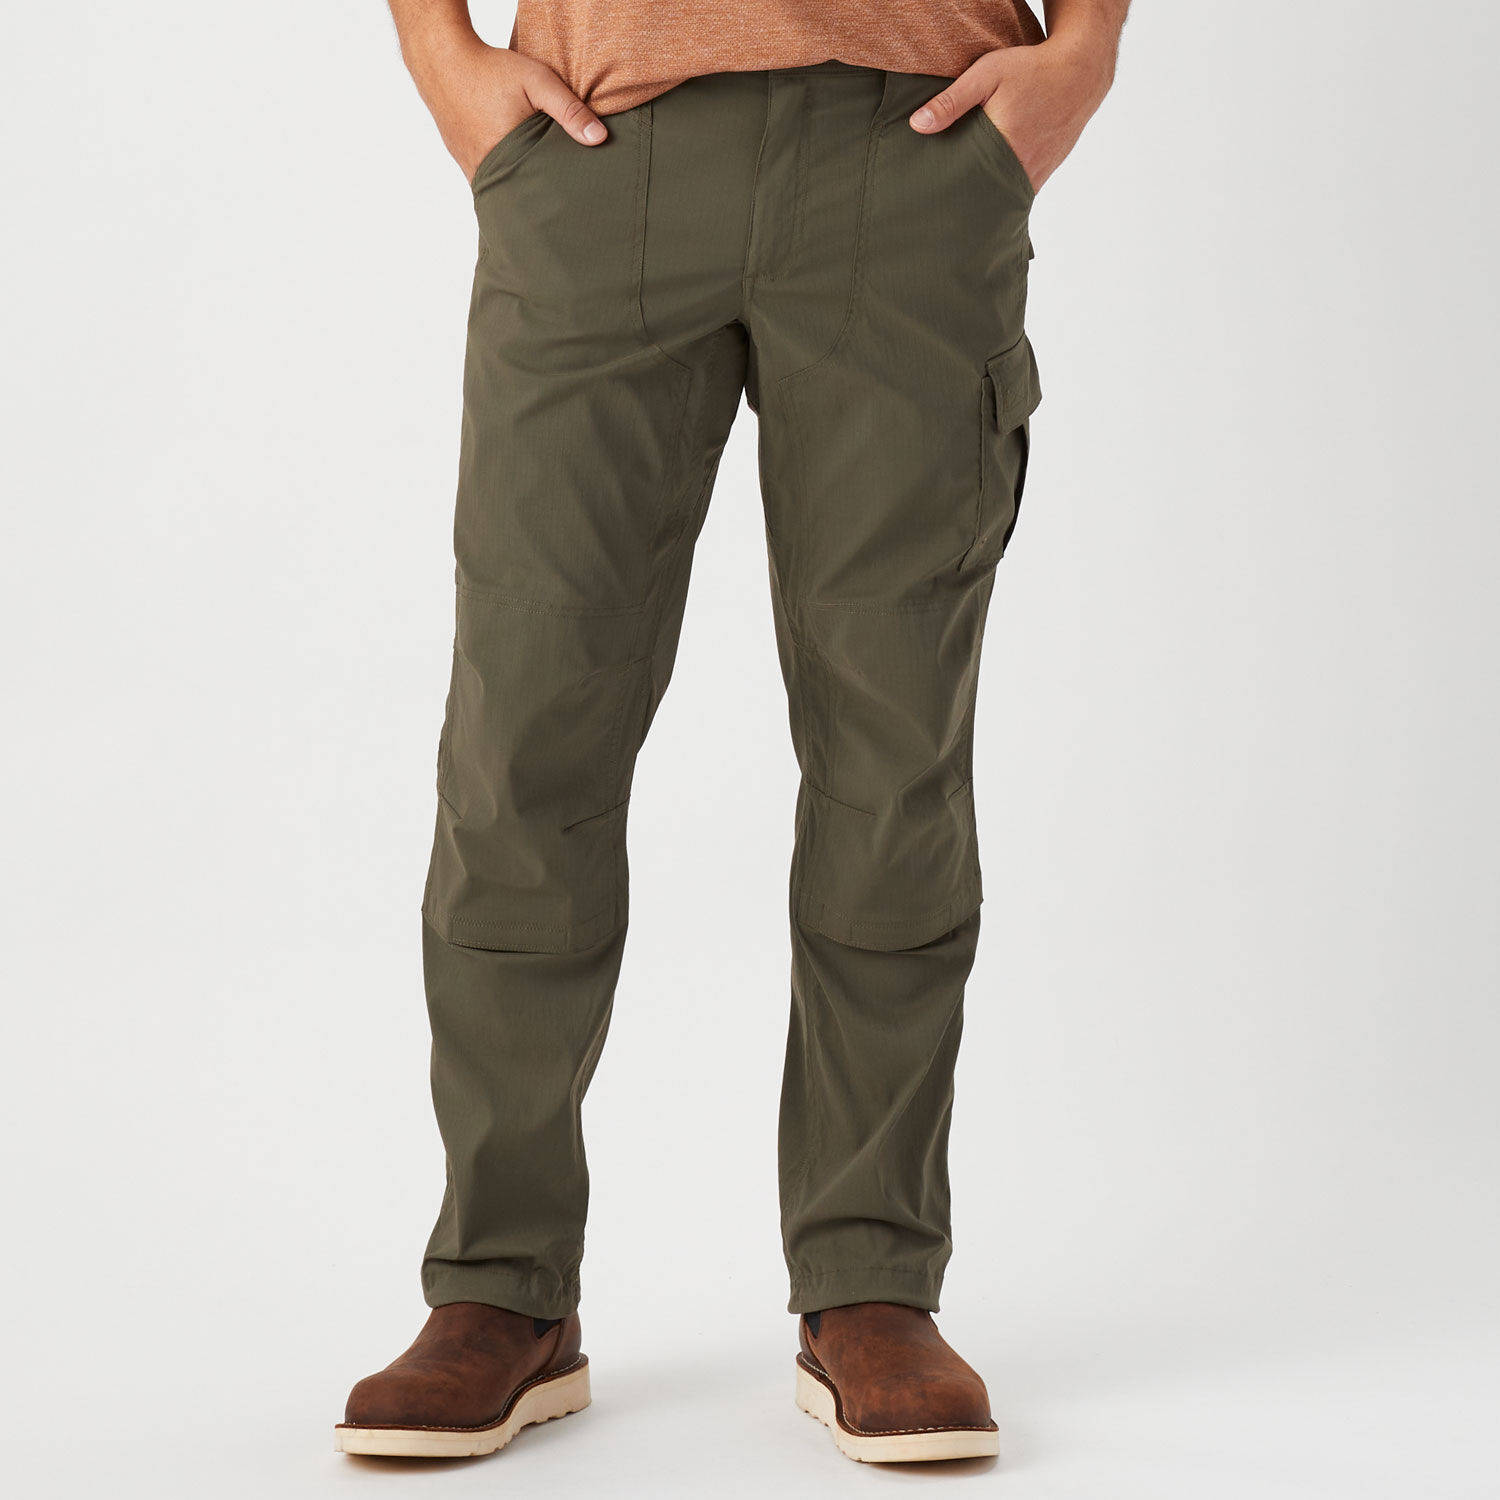 Buy Men's Poise Olive Green Trousers Online | SNITCH